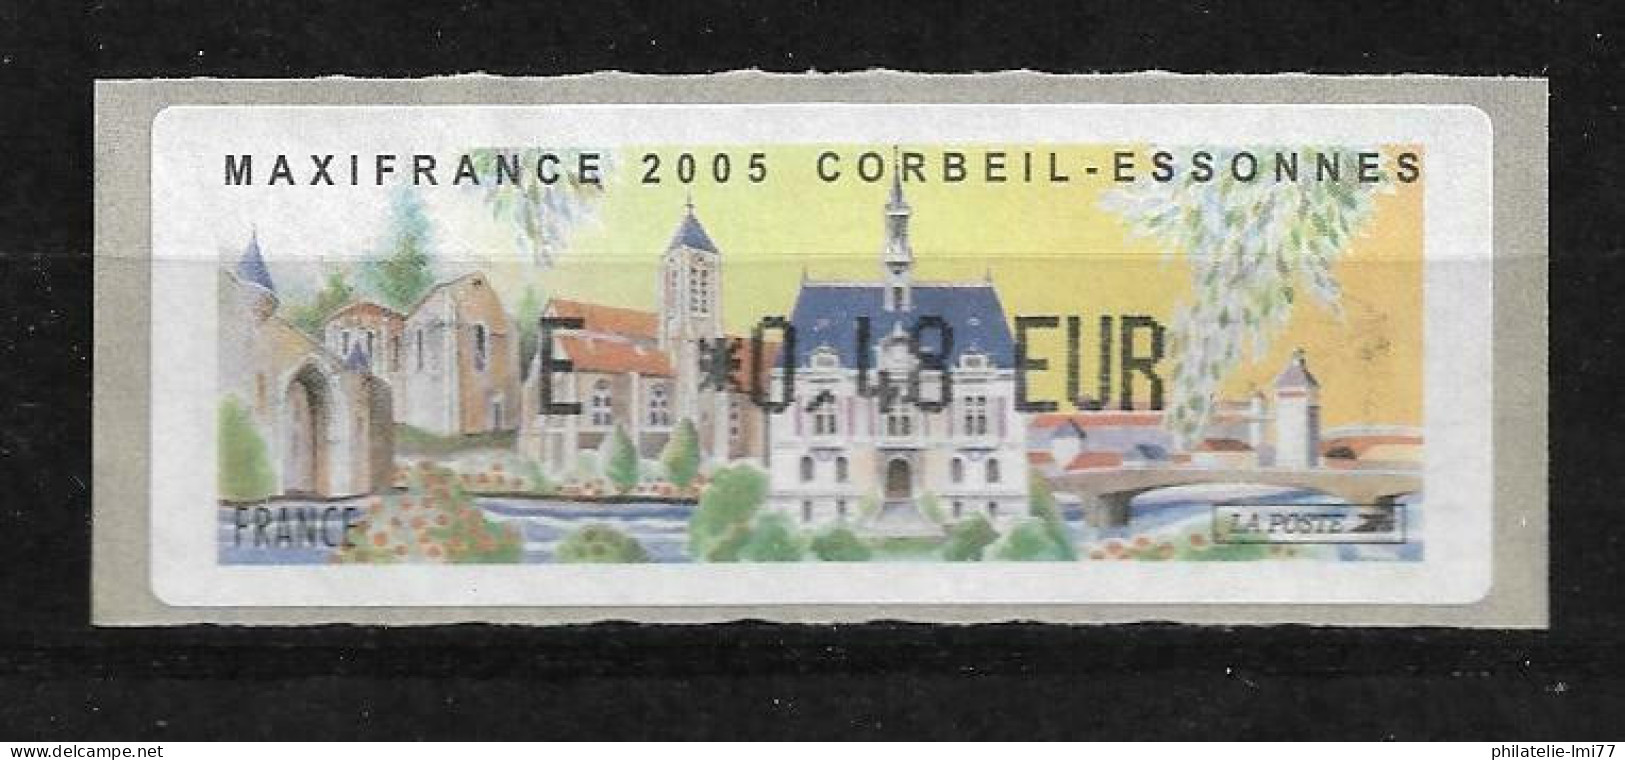 LISA 0,48 € - Maxifrance 2005 Corbeil-Essonnes - 1999-2009 Illustrated Franking Labels